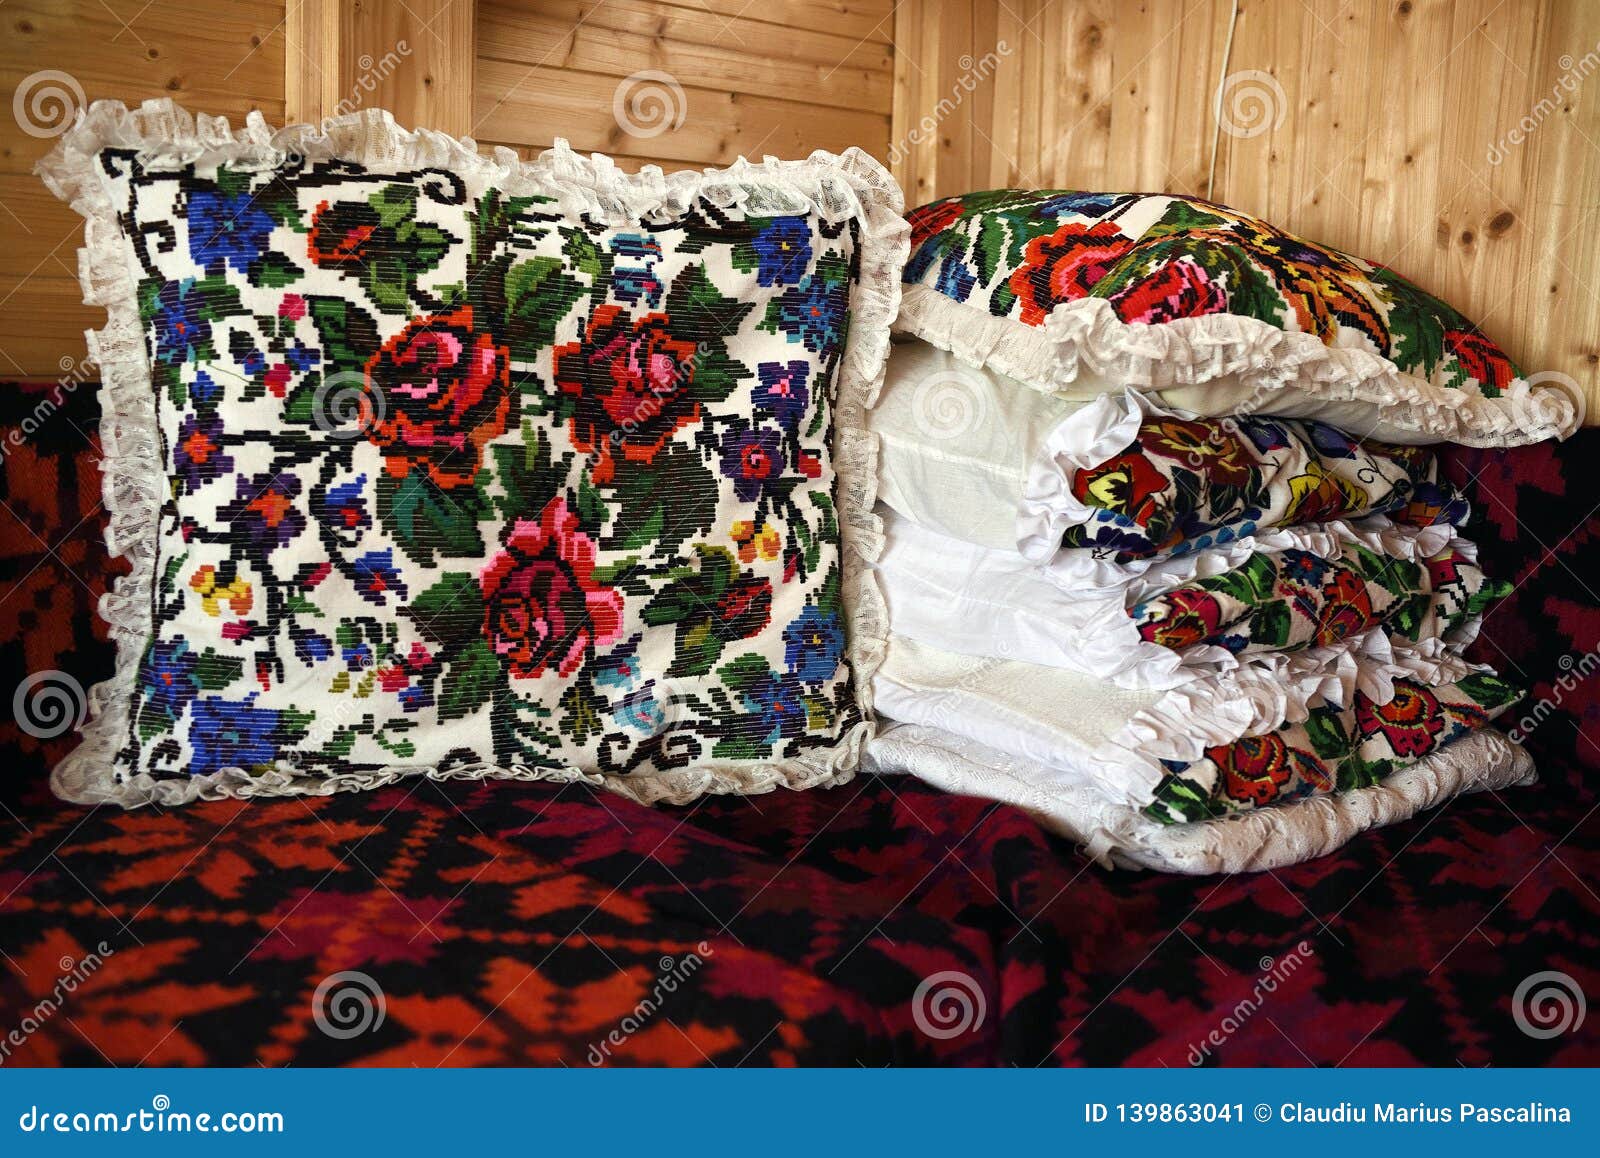 Colorful Embroidered Decorative Pillows from Maramures Region, Romania ...